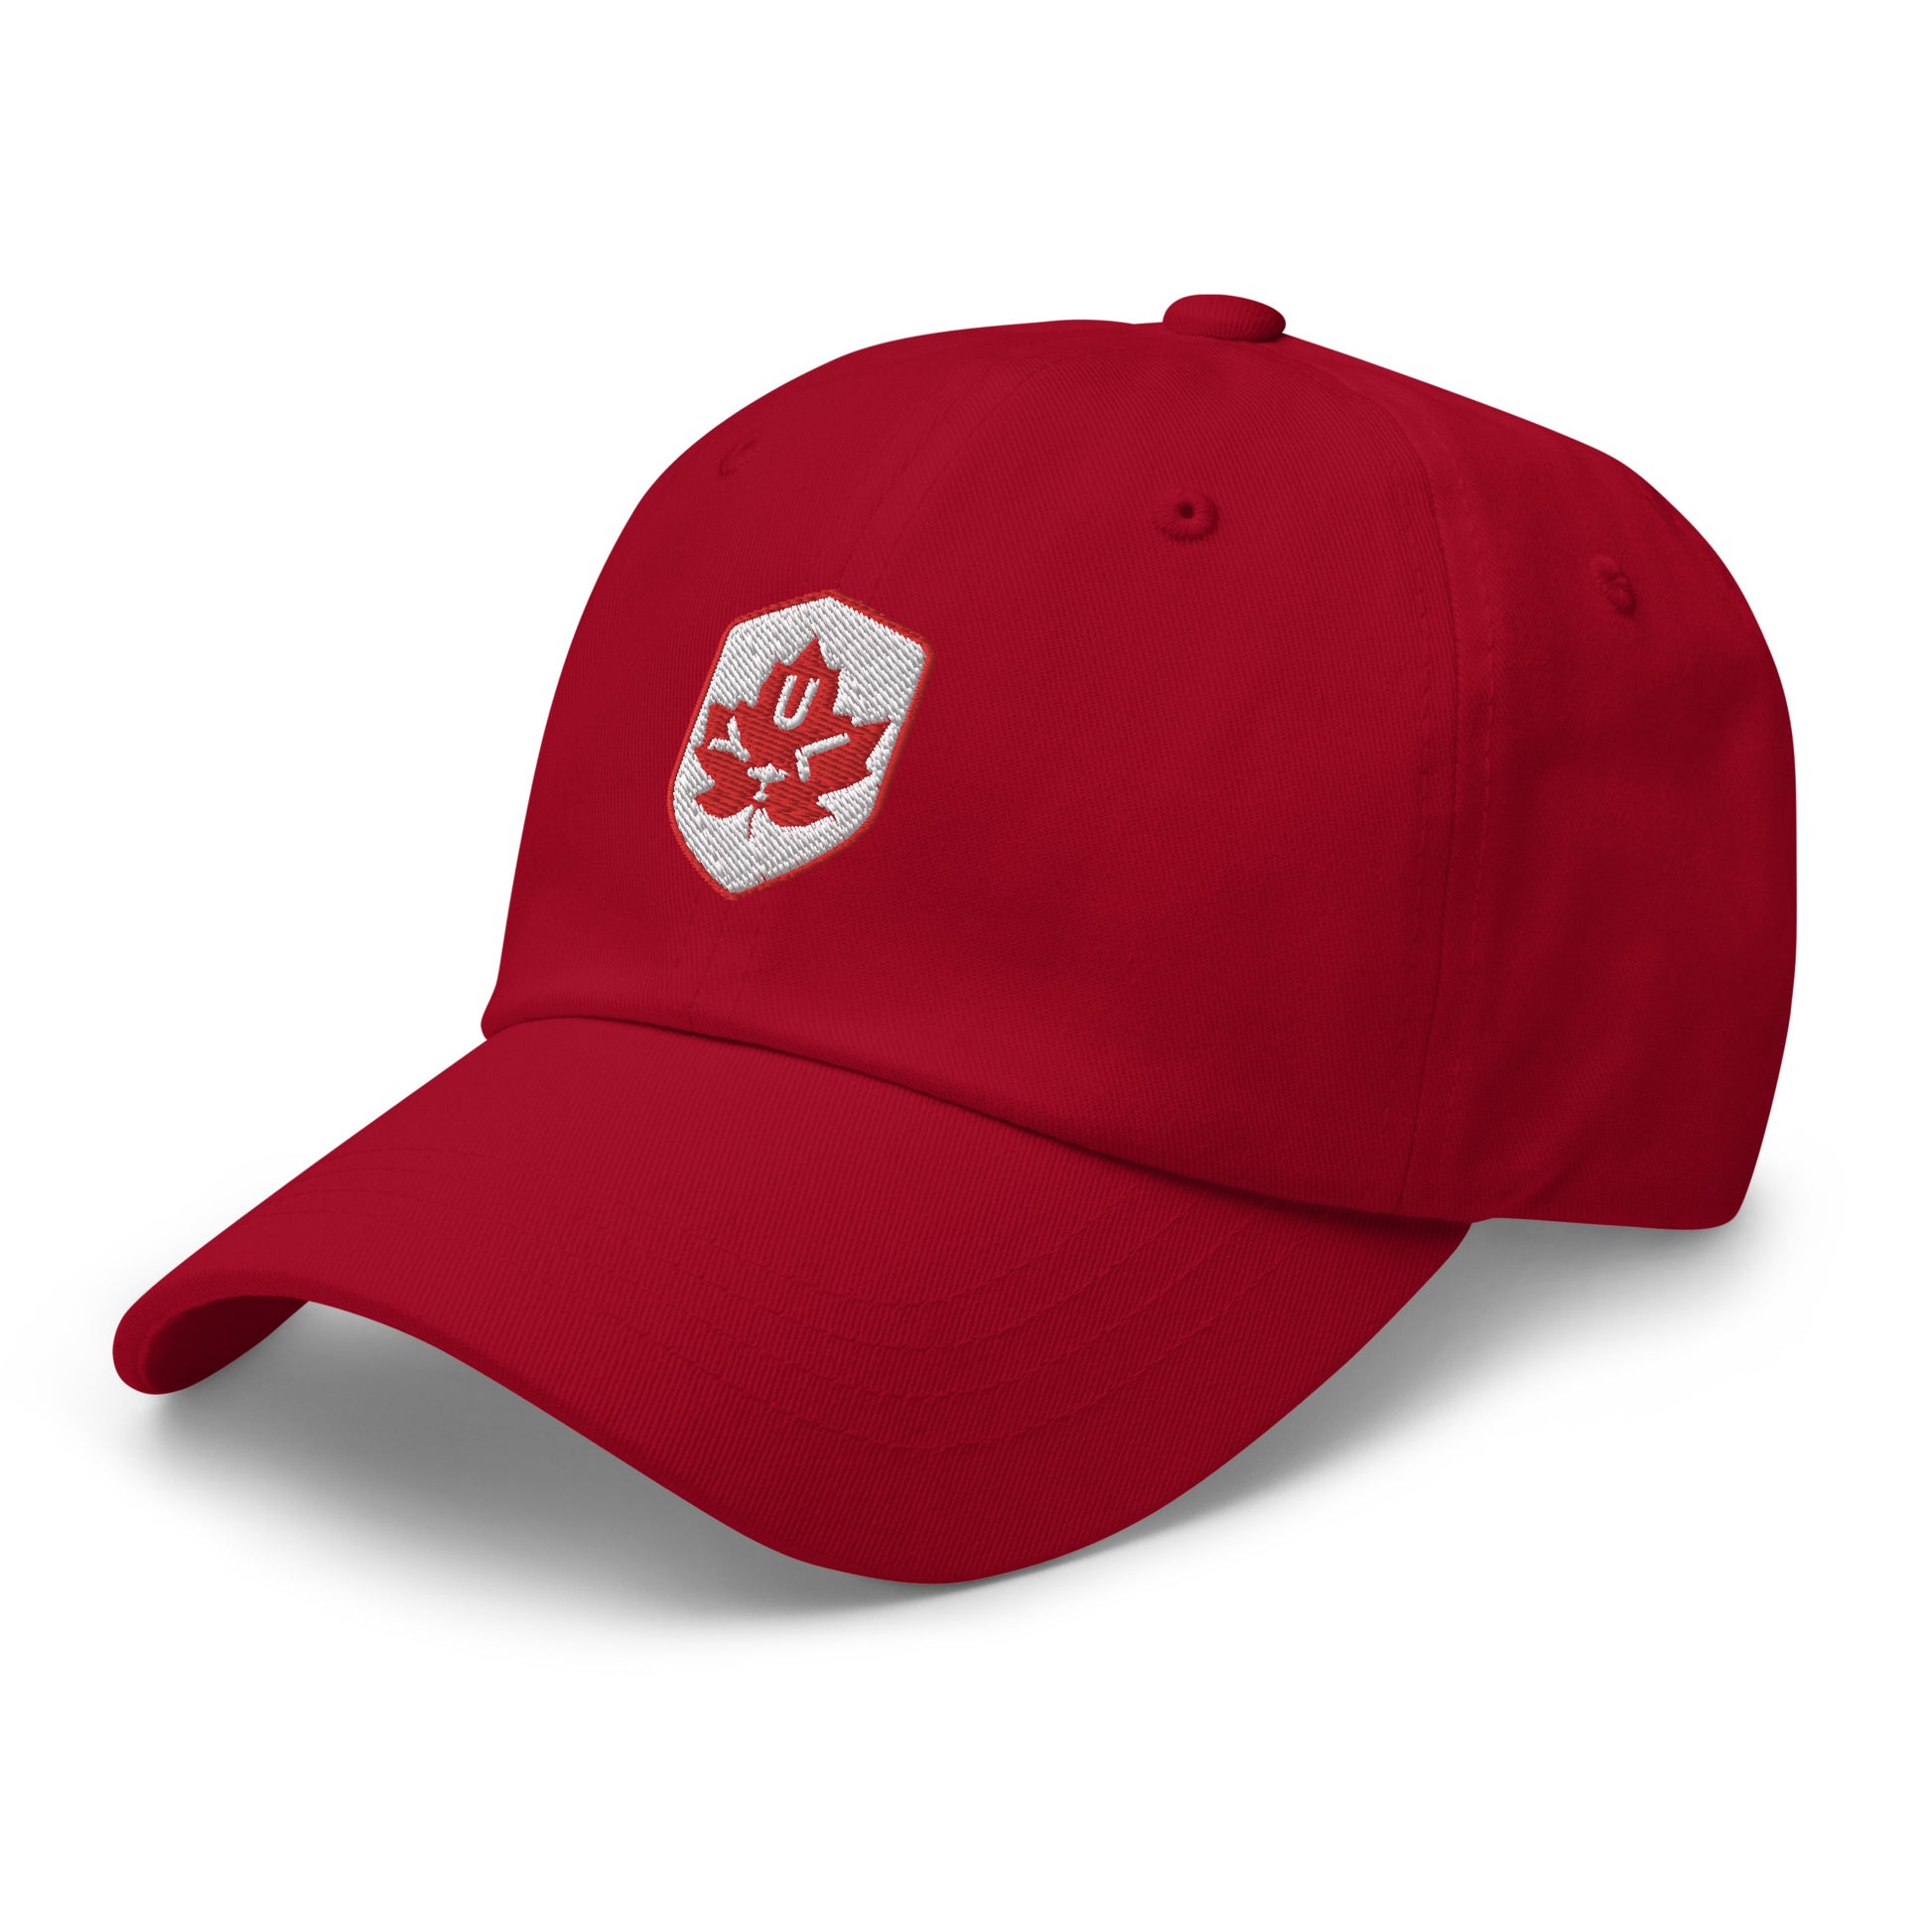 Maple Leaf Baseball Cap - Red/White • YUL Montreal • YHM Designs - Image 16